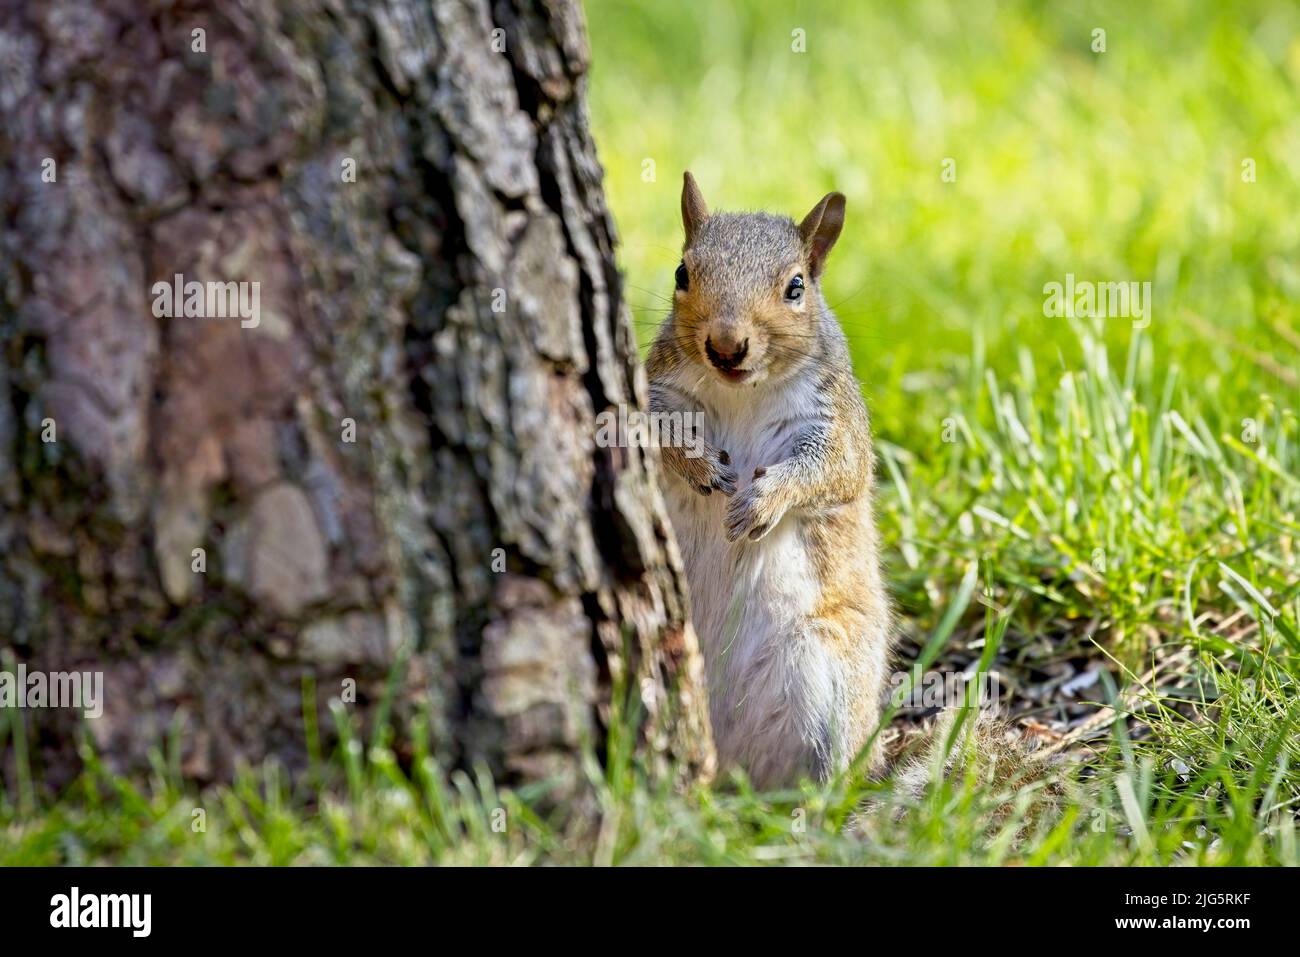 A cute and alert squirrel stands behind a tree in Rathdrum, Idaho. Stock Photo